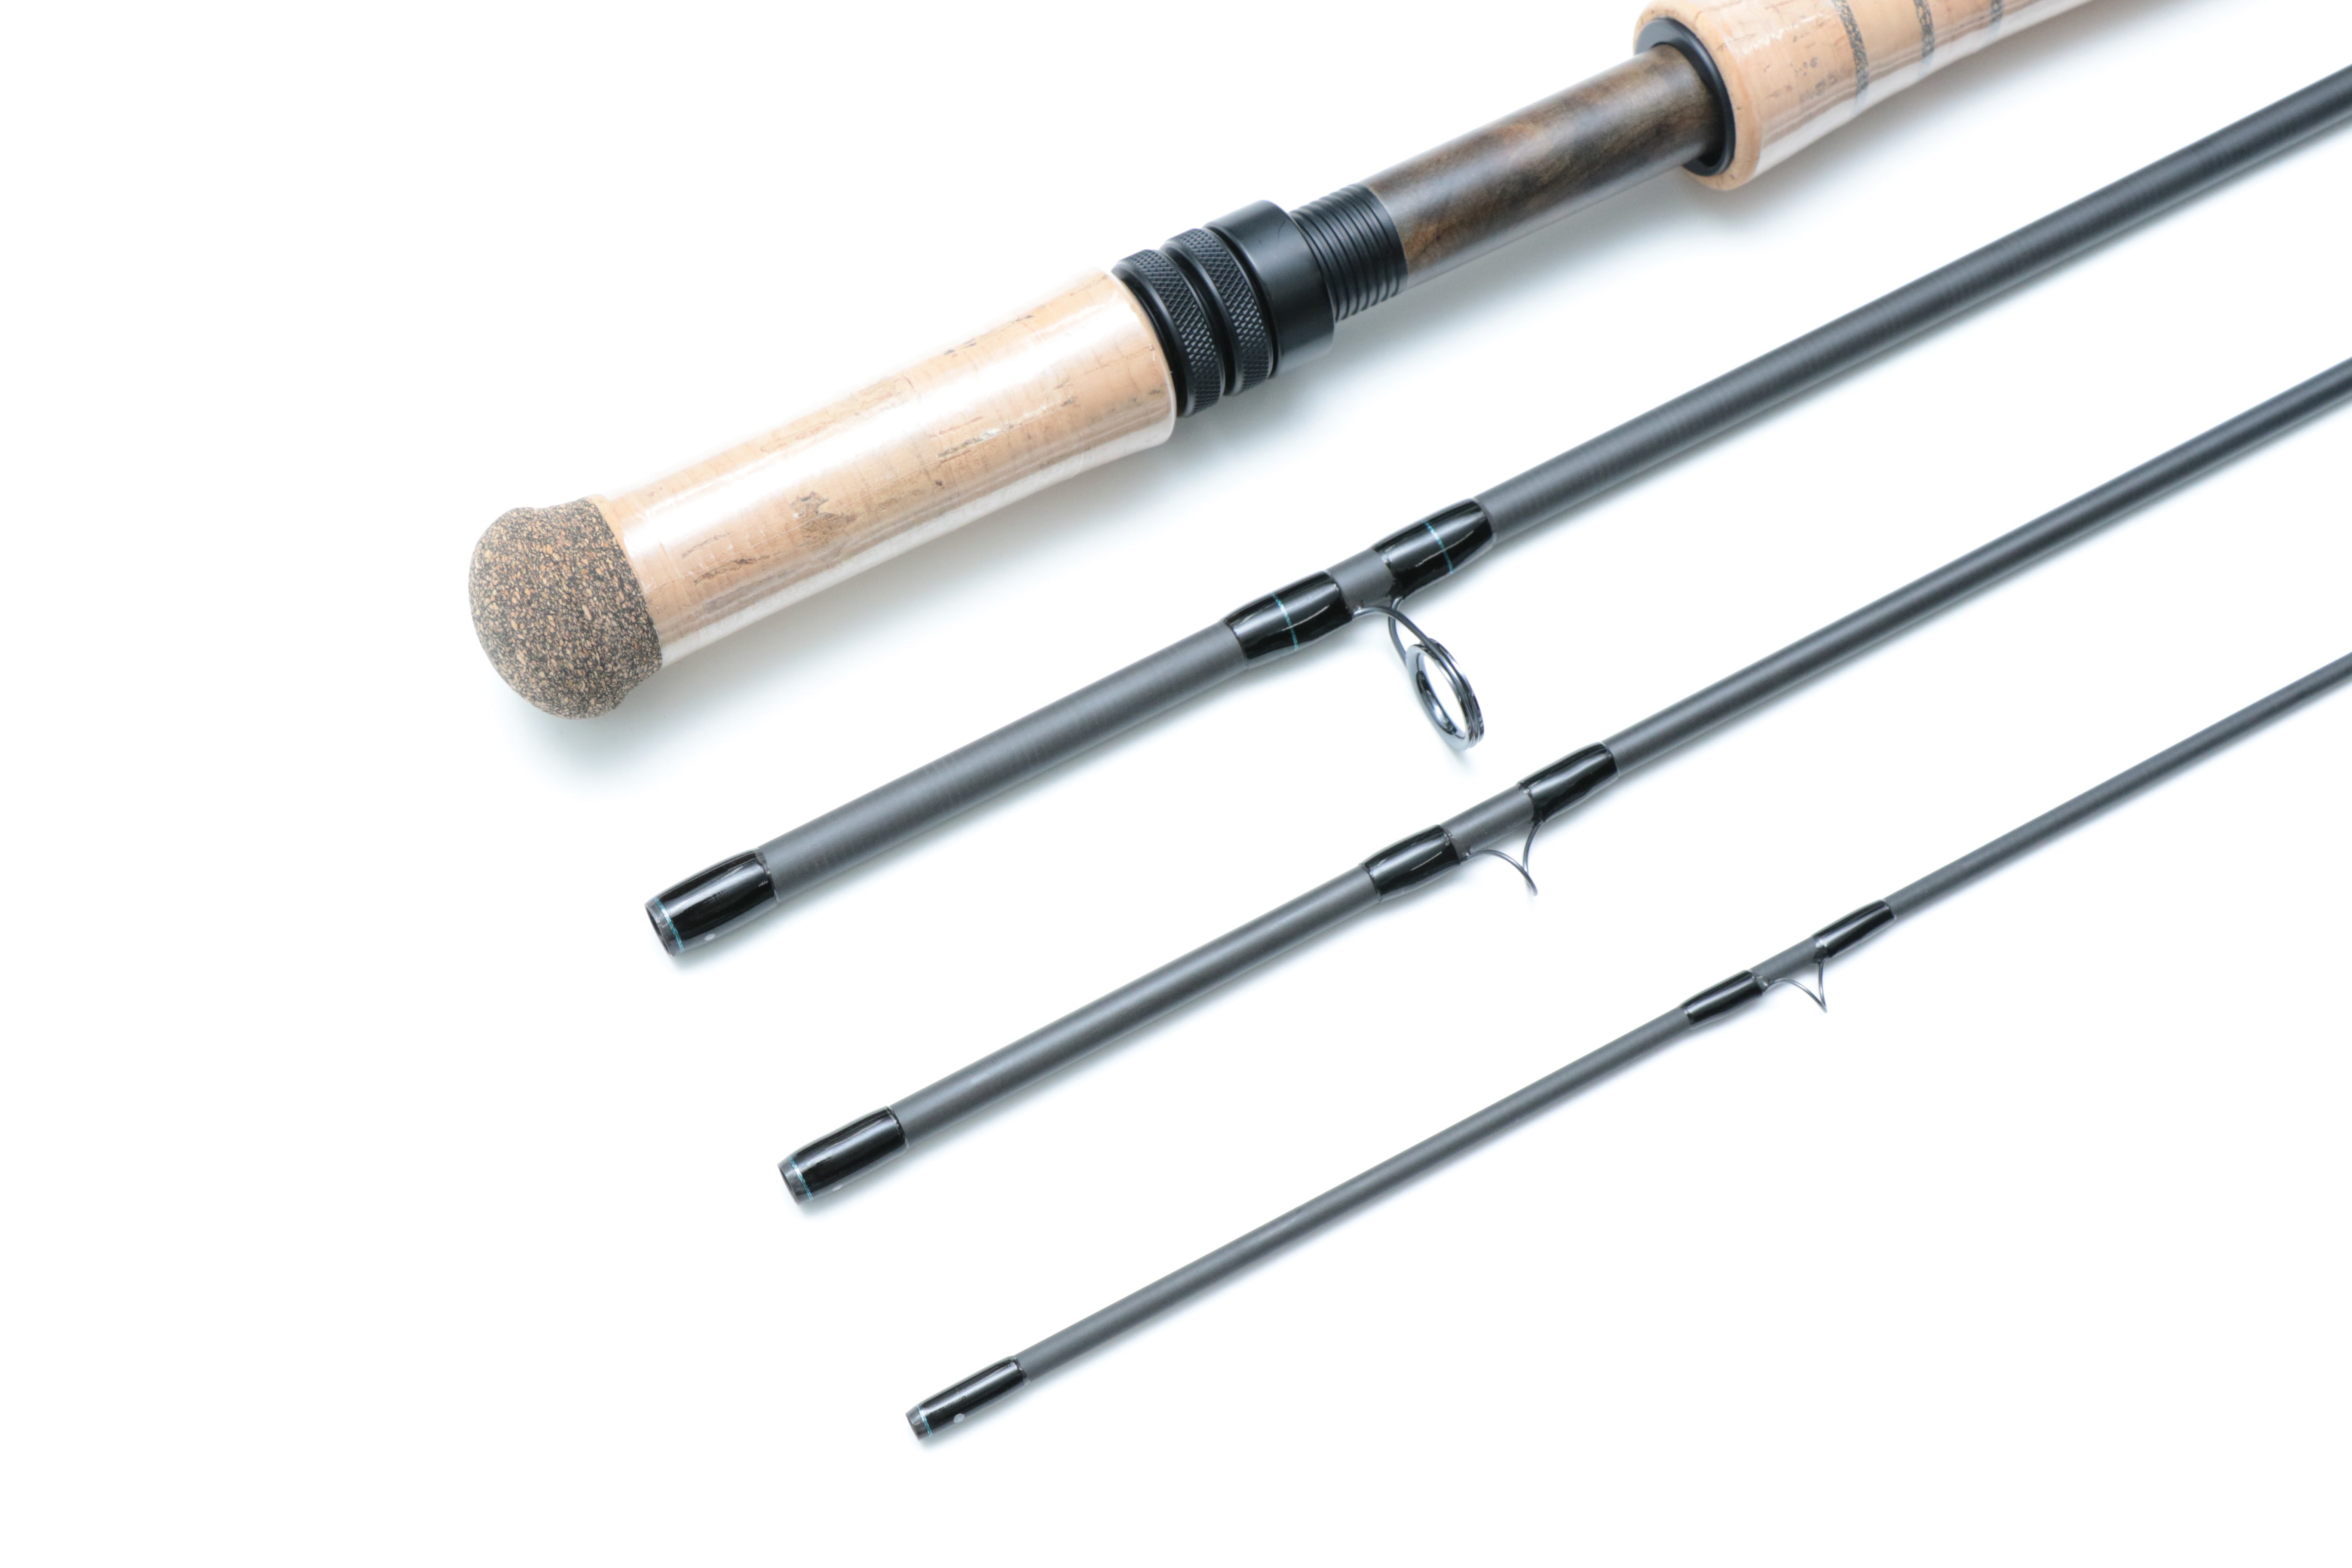 OPST Two-Handed Rods – OLYMPIC PENINSULA SKAGIT TACTICS